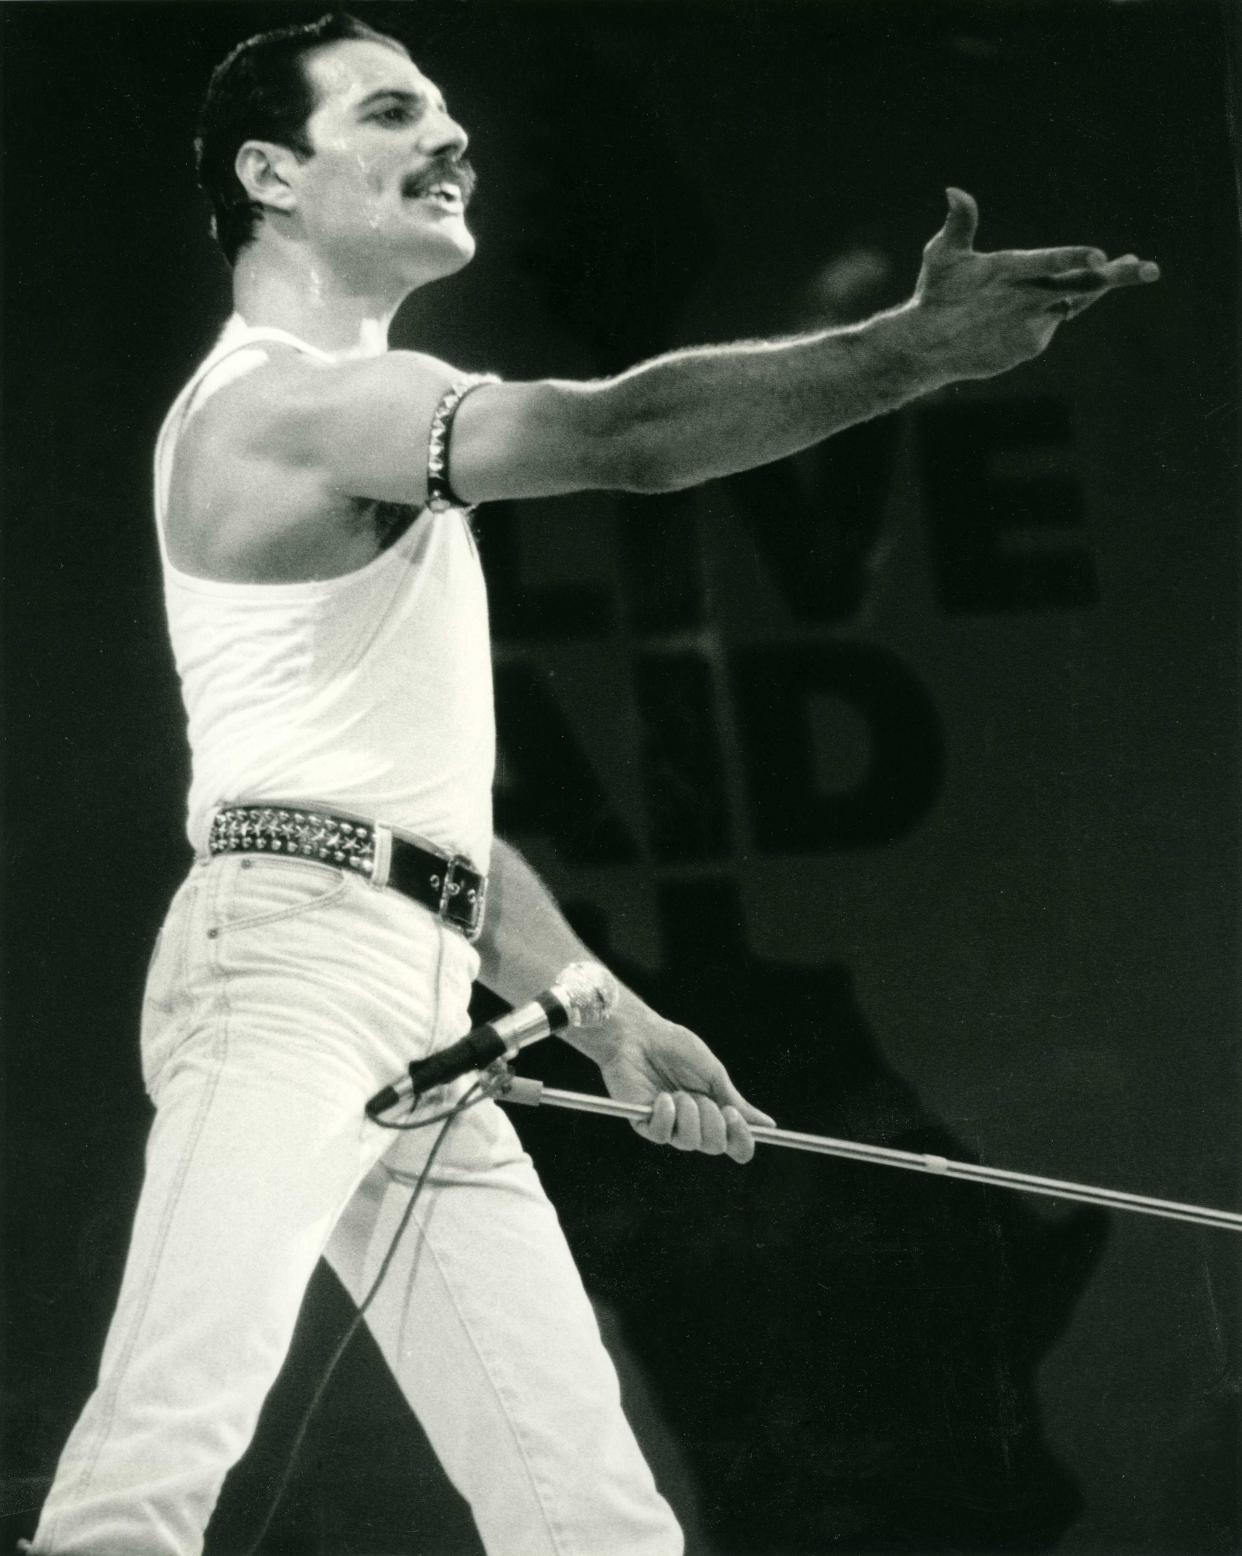 Freddie Mercury with Queen on stage at Live Aid on 13 July 1985 at Wembley Stadium, London.